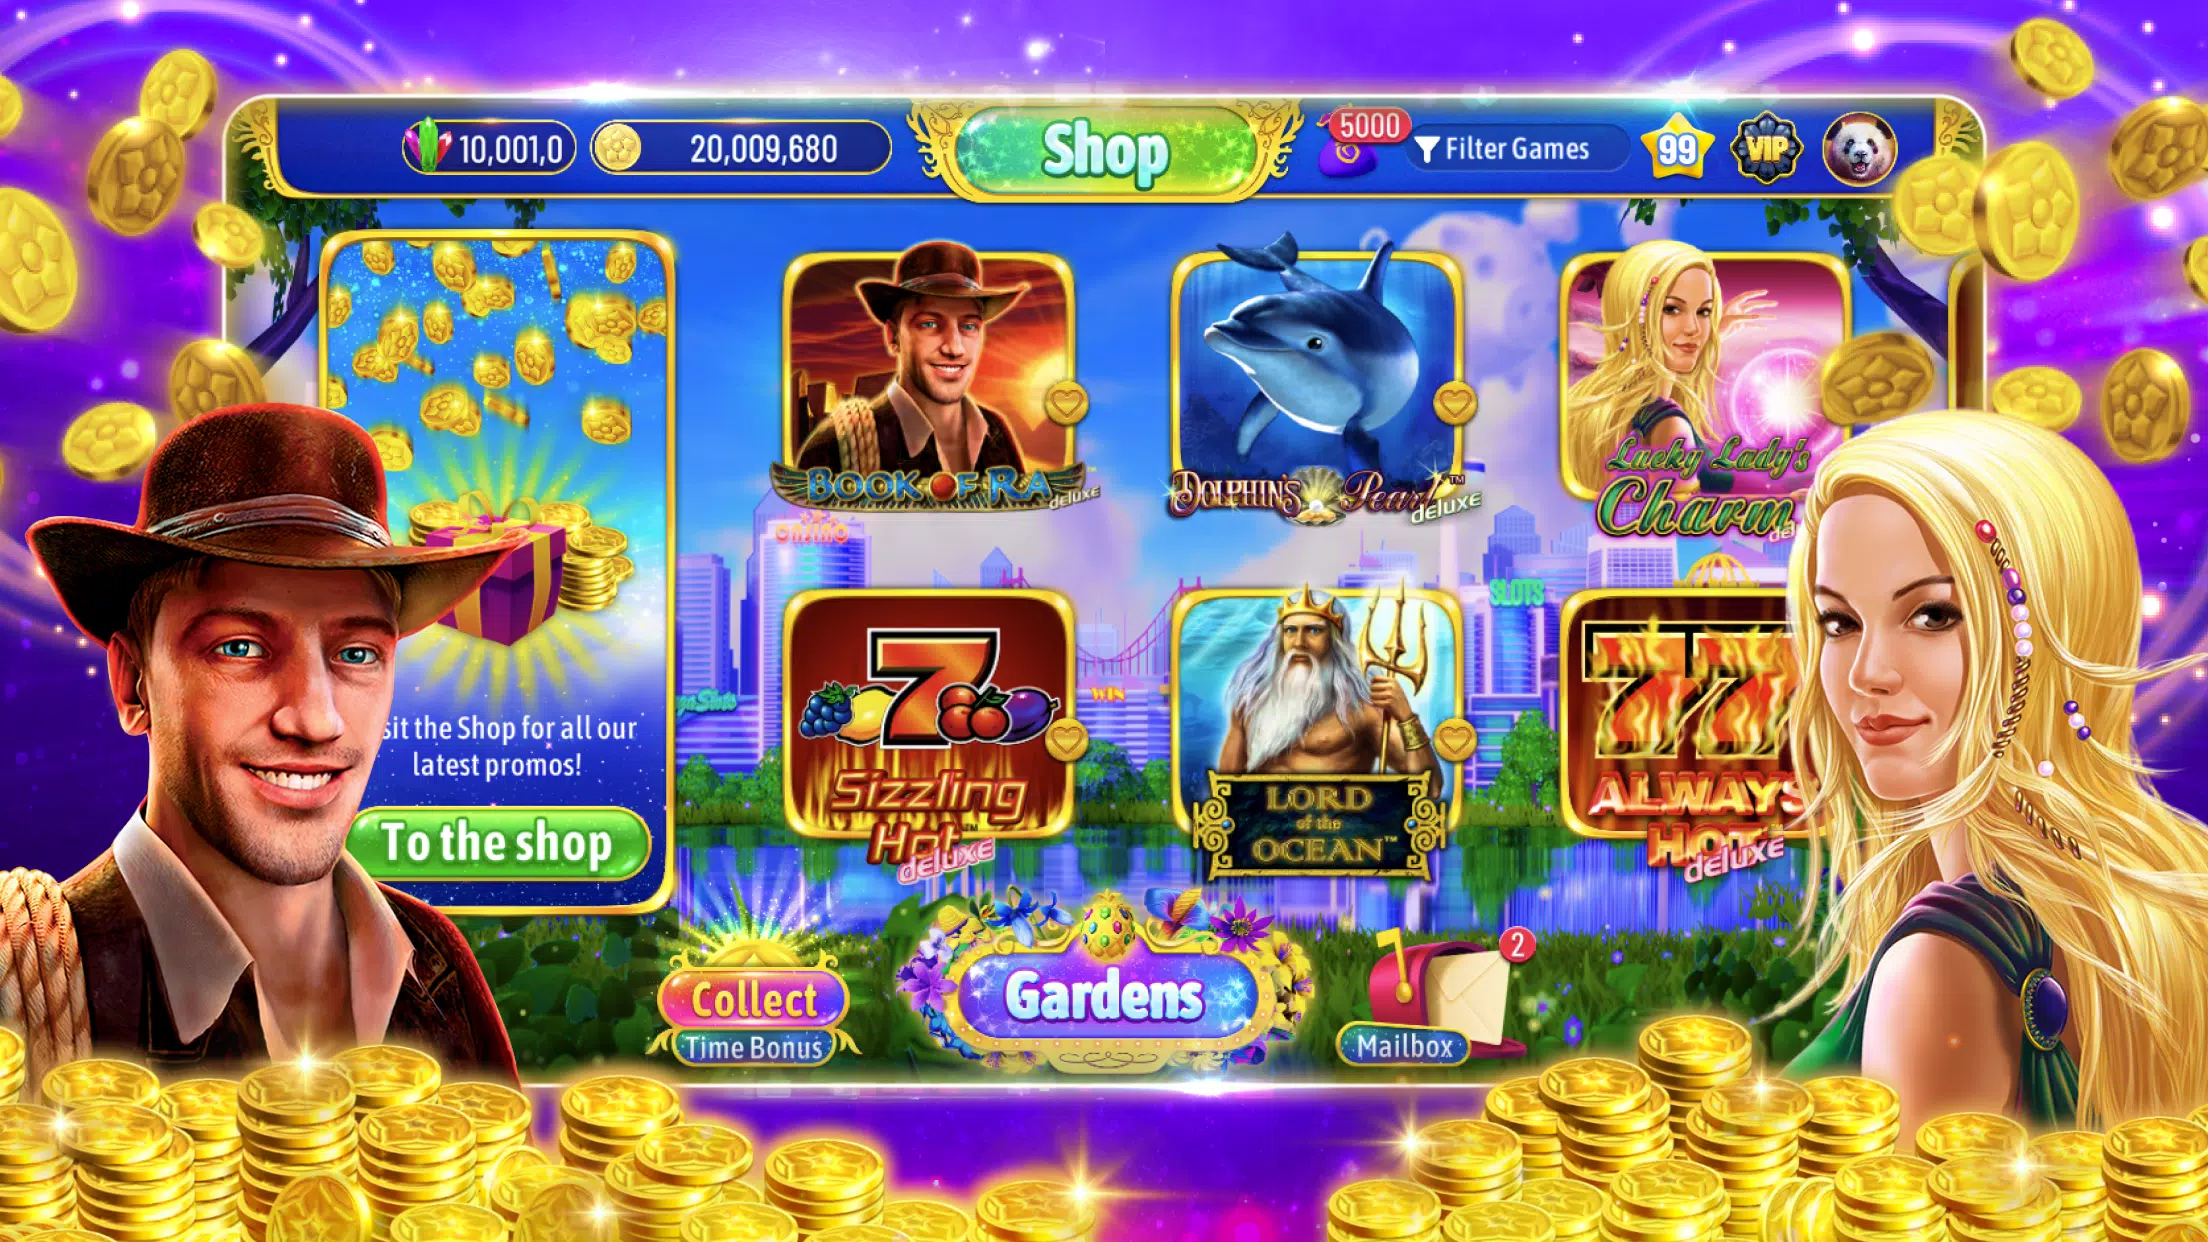 Bloom Boom Casino APK for Android Download